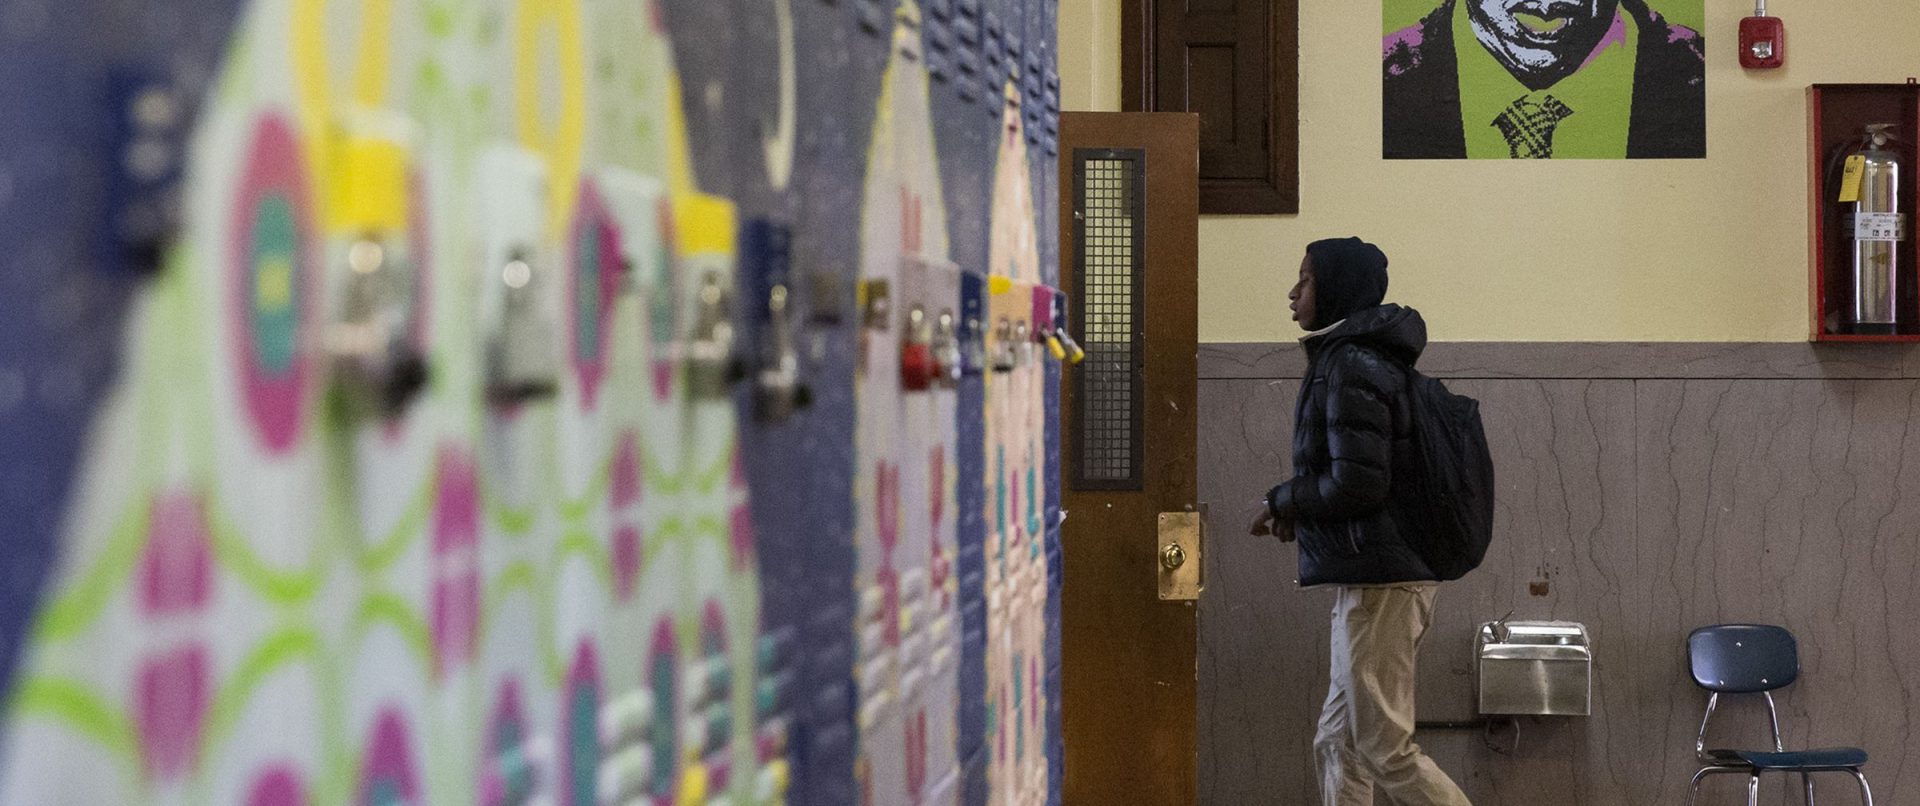 In this file photo, a student walks into a classroom at Jay Cooke Elementary in North Philadelphia. Philadelphia is among the school districts most shortchanged by the way Pennsylvania funds public education, according to a new analysis in a lawsuit challenging the system.